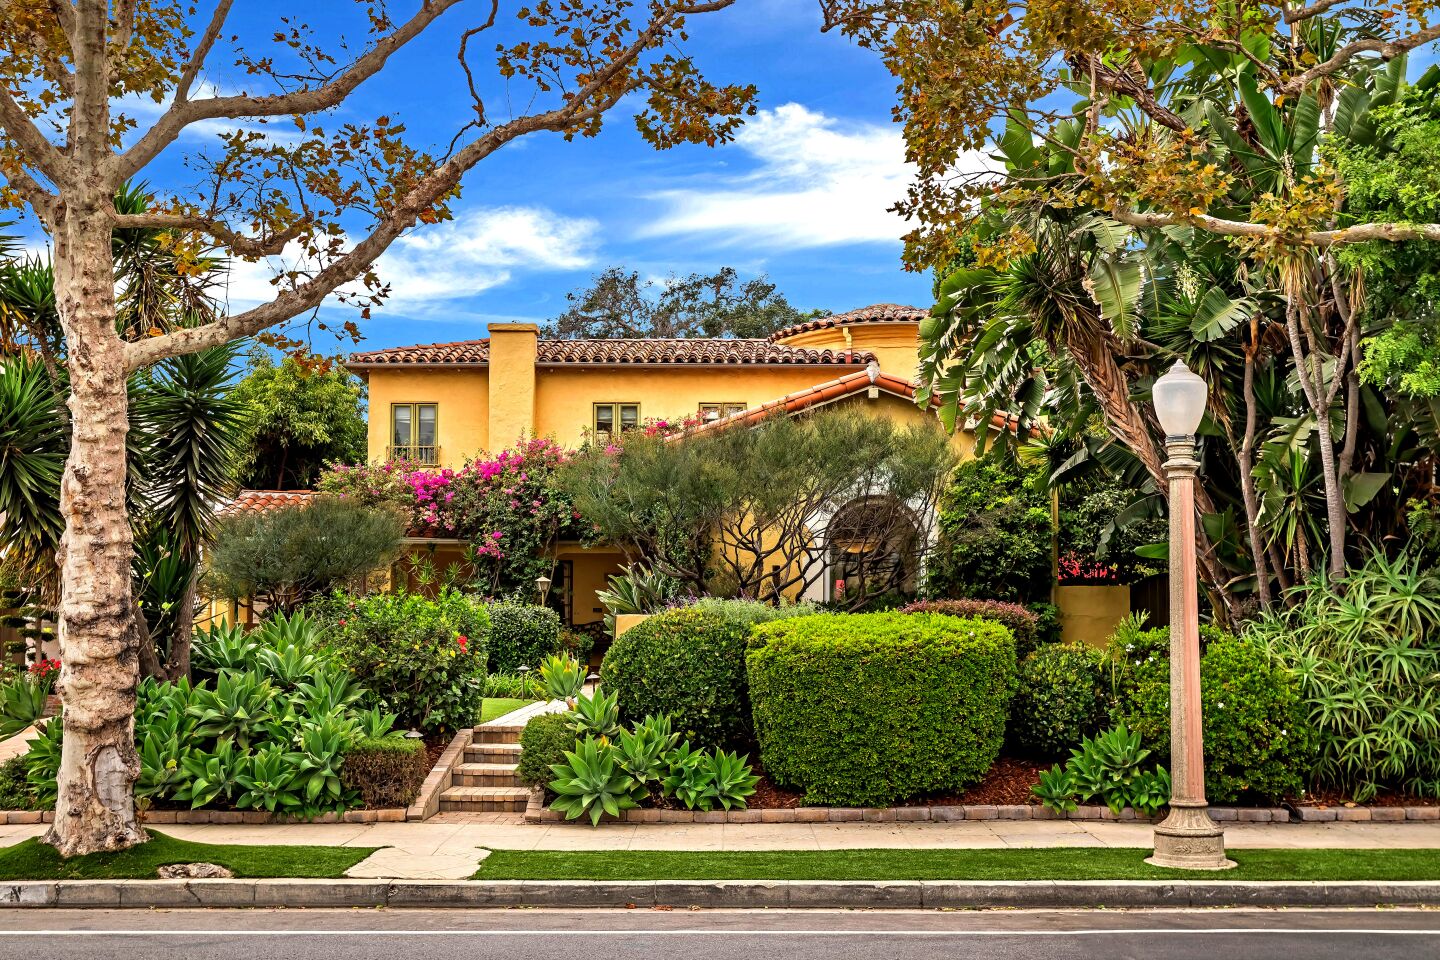 Built in 1929, the charming Spanish Revival-style home was once owned by a pair of Getty Center architectural historians.